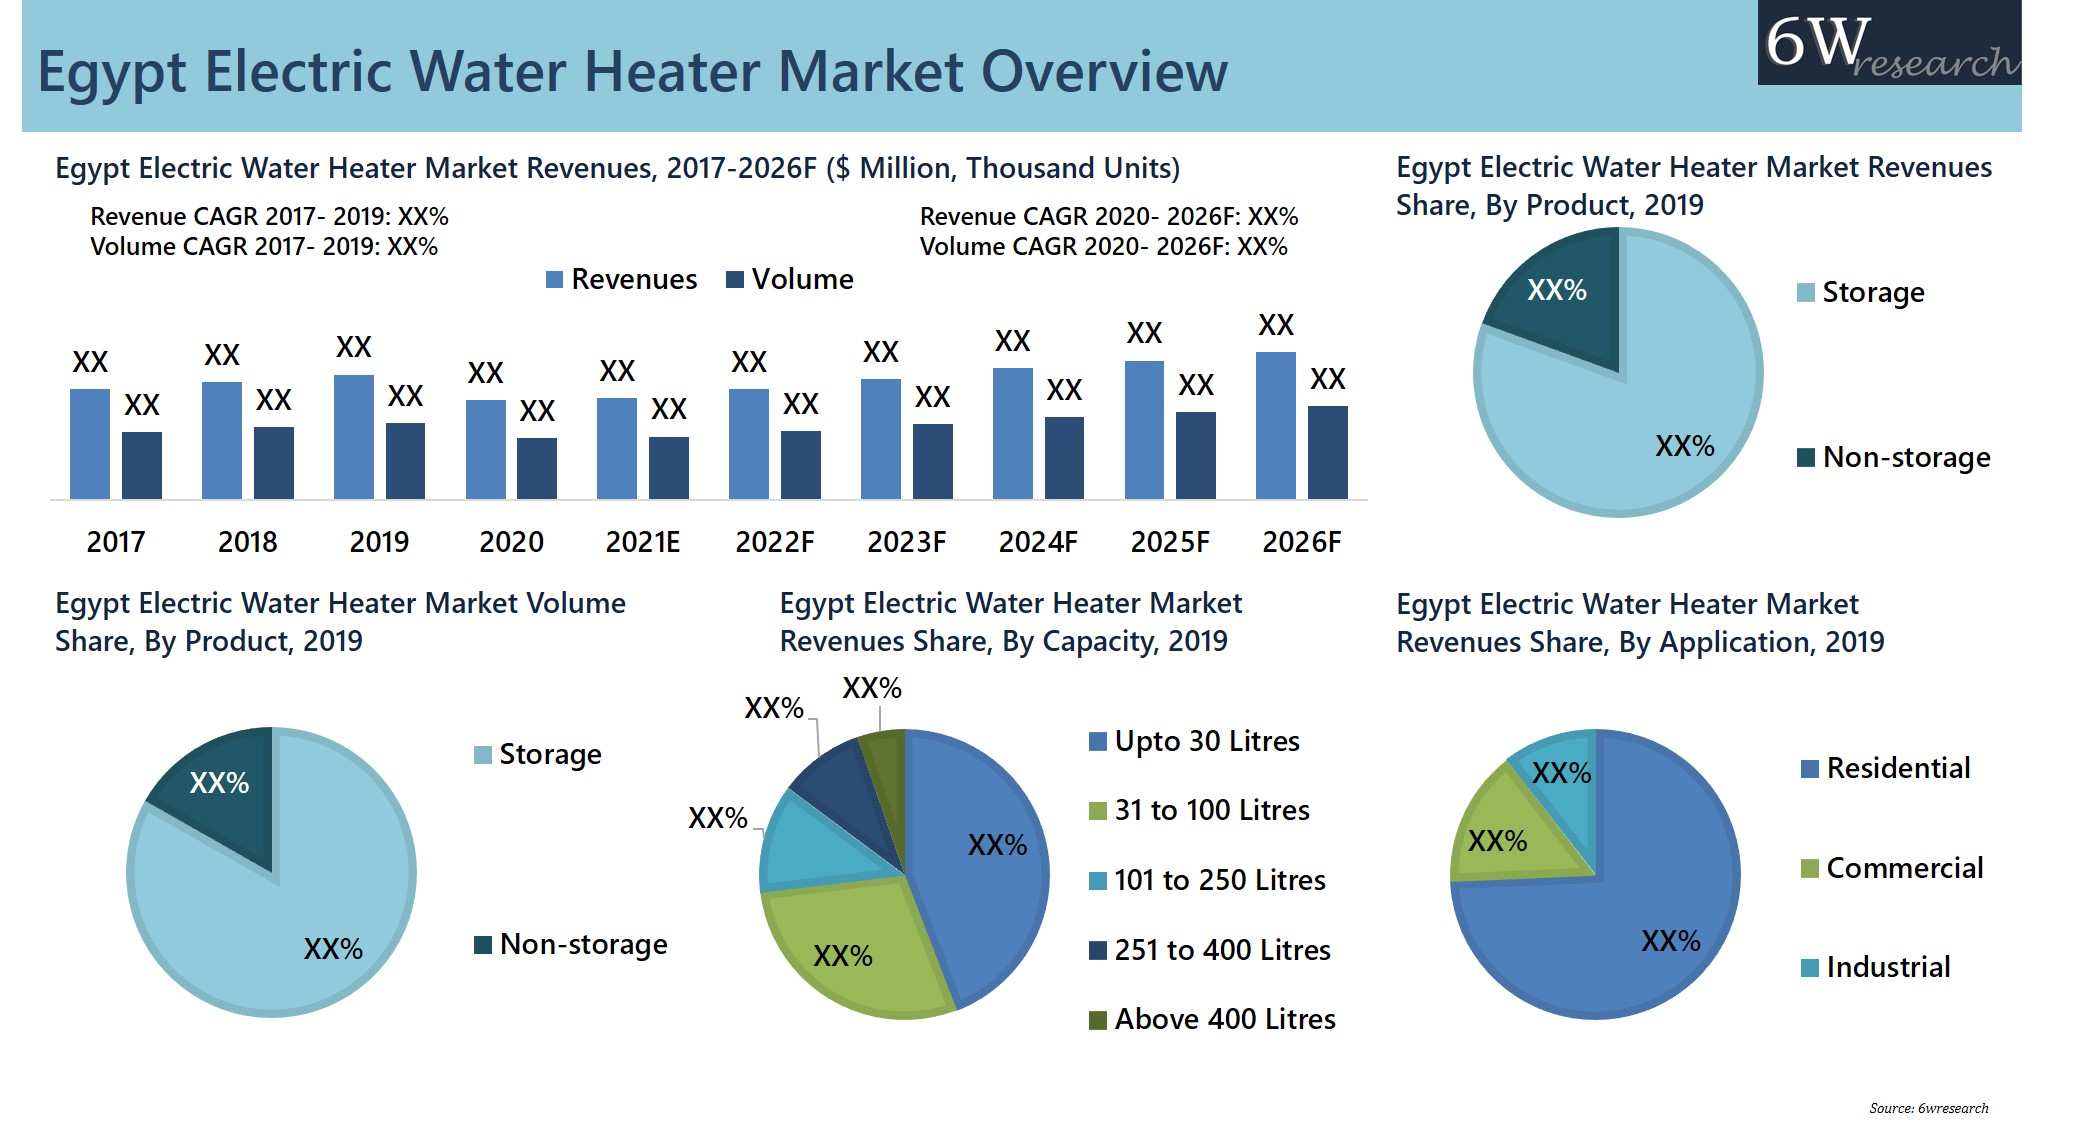 Egypt Electric Water Heater Market